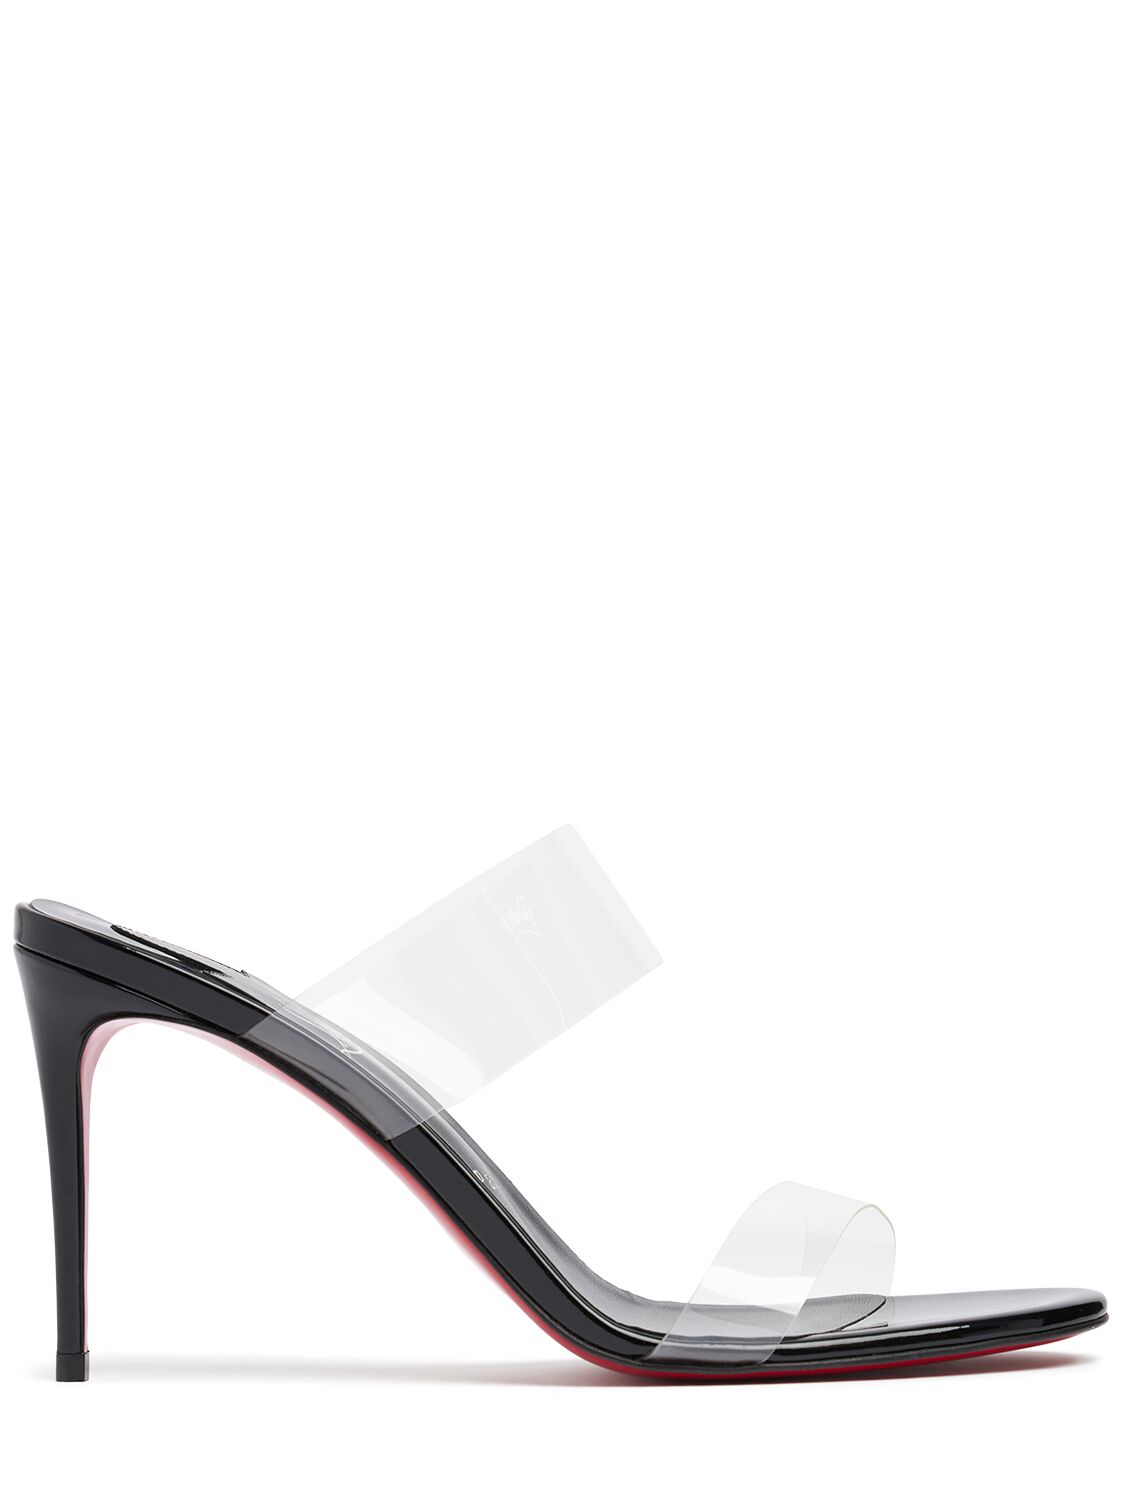 Christian Louboutin 85mm Just Nothing Pvc Mule Sandals In Transparent/bla